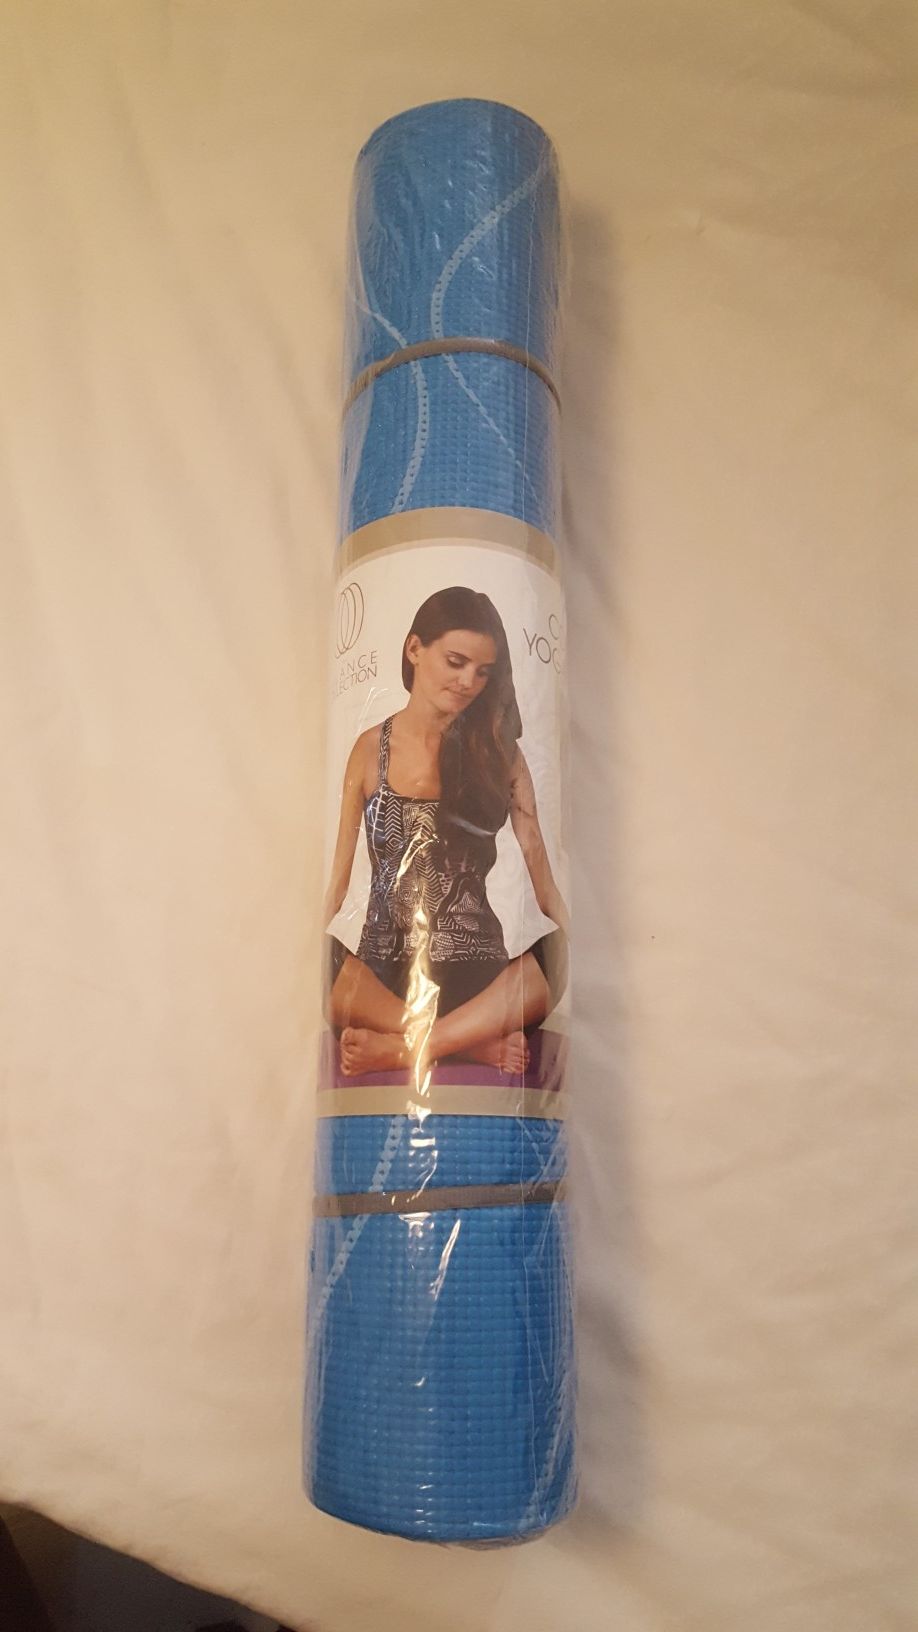 YOGA MAT 5MM. 24 X 72 INCHES BRAND NEW